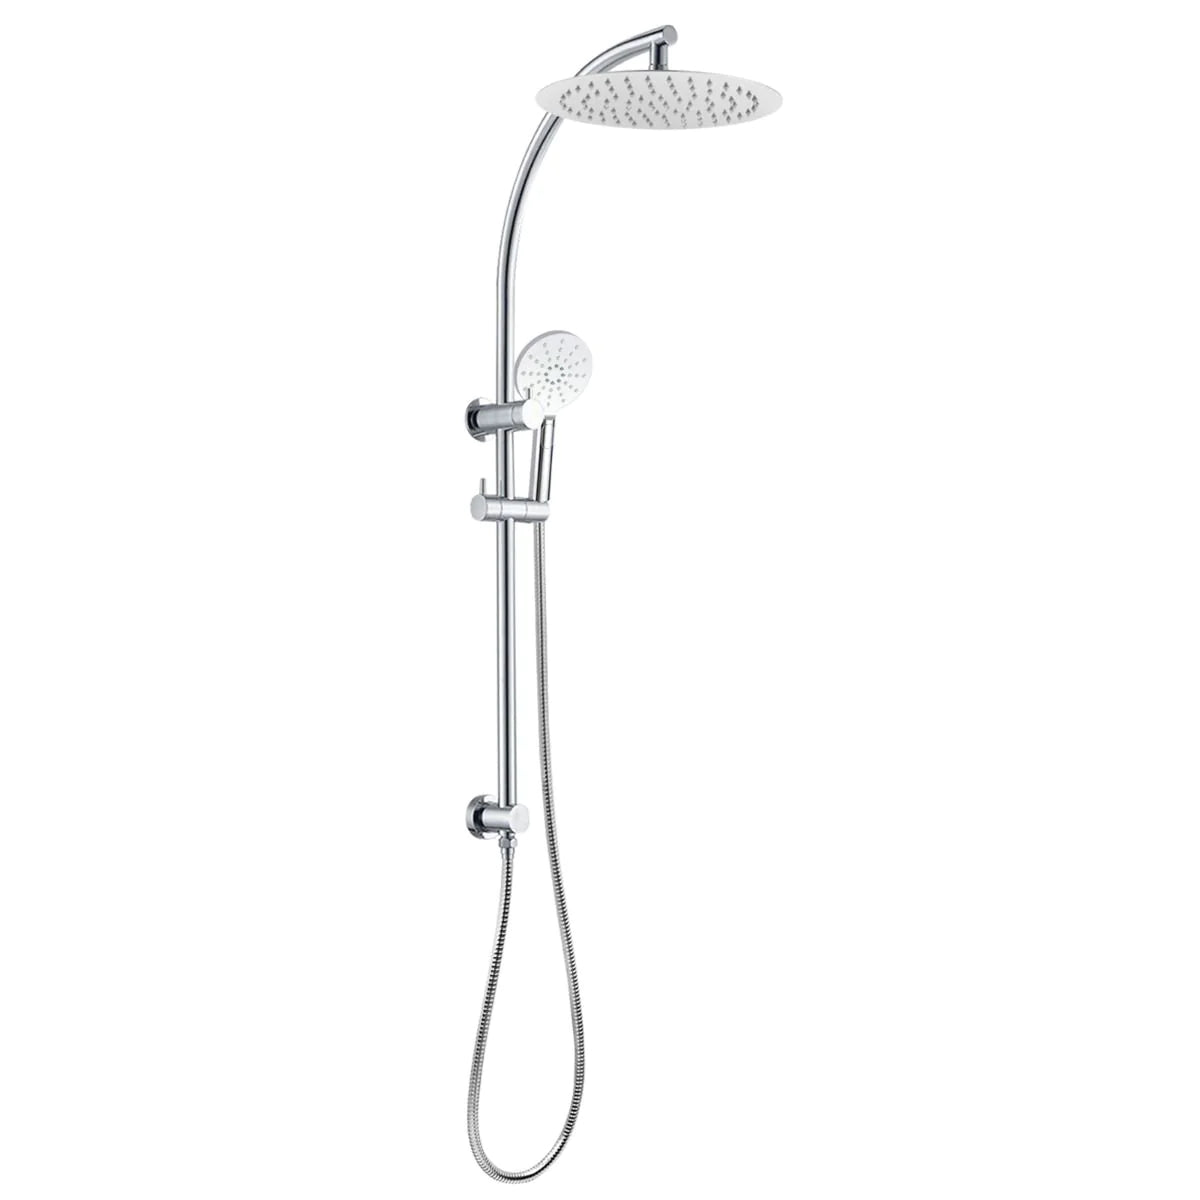 10-round-shower-station-top-inlet-Chrome-CH2128-SH-N+CH0007-SH+CH-R11-HHS